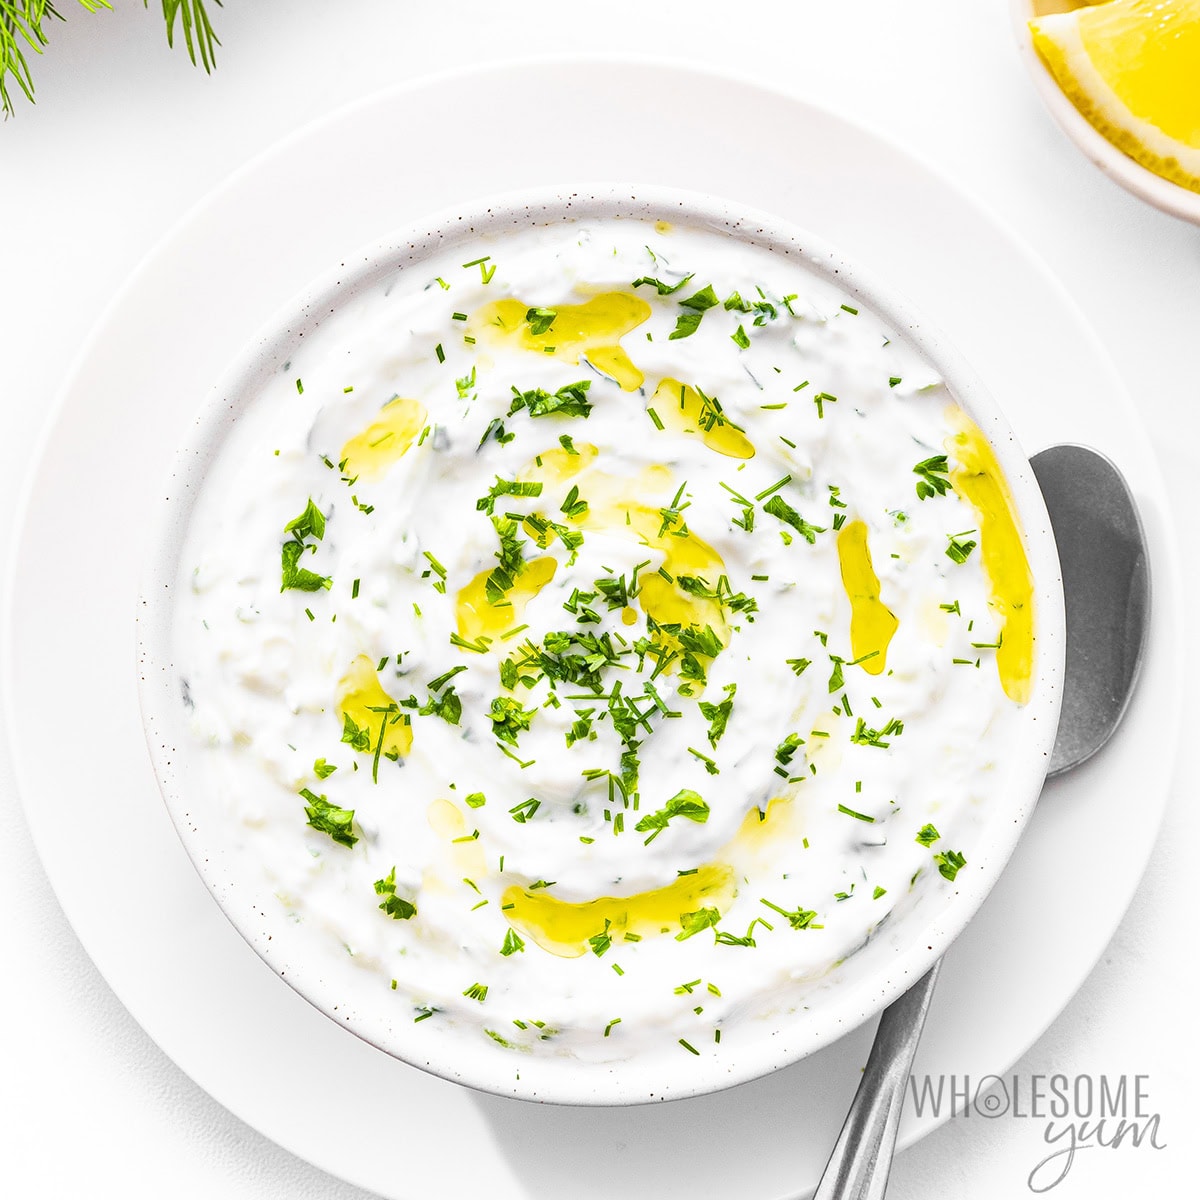 Finished tzatziki sauce recipe in a bowl, garnished with olive oil and fresh herbs.